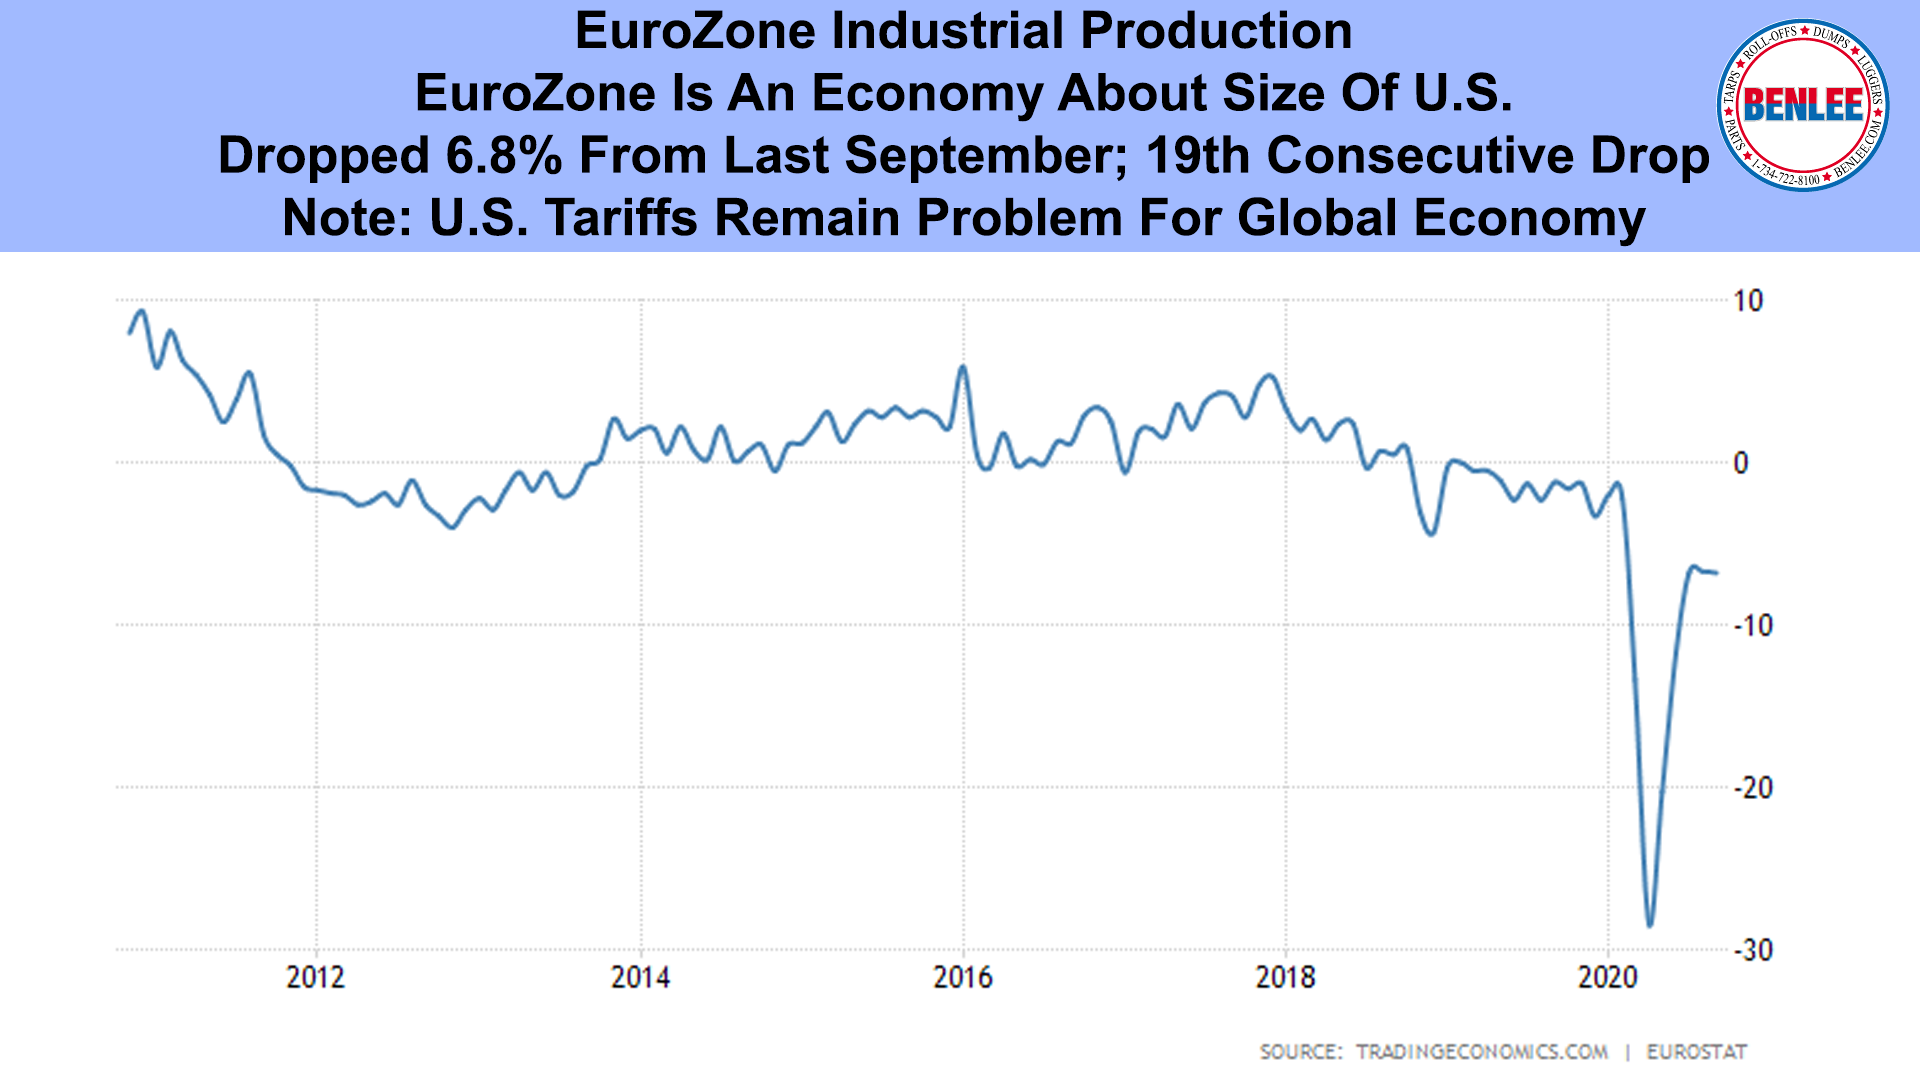 EuroZone Industrial Production